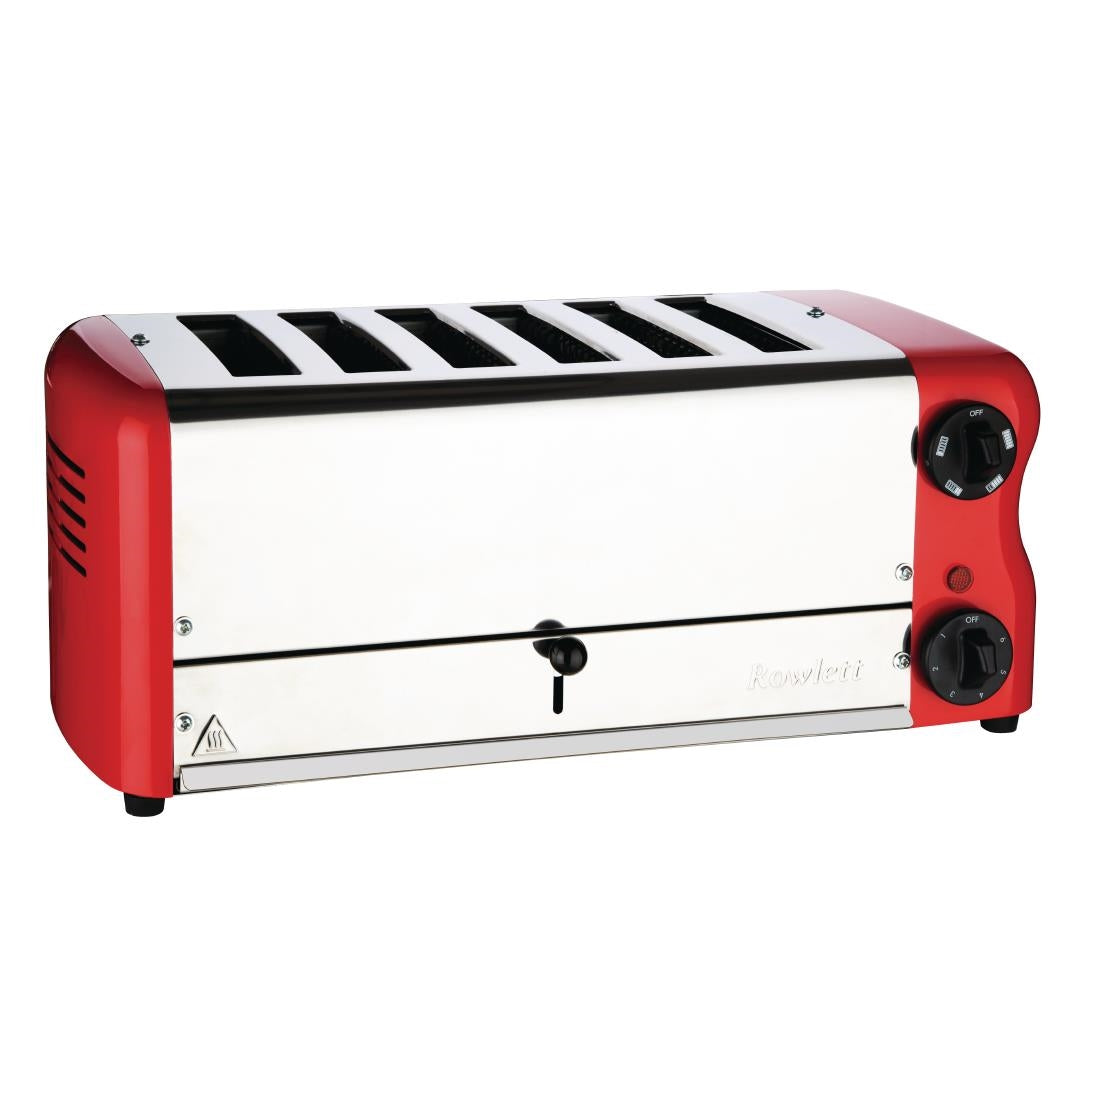 CH188 Rowlett Esprit 6 Slot Toaster Traffic Red w/2x Additional Elements & Sandwich Cage JD Catering Equipment Solutions Ltd